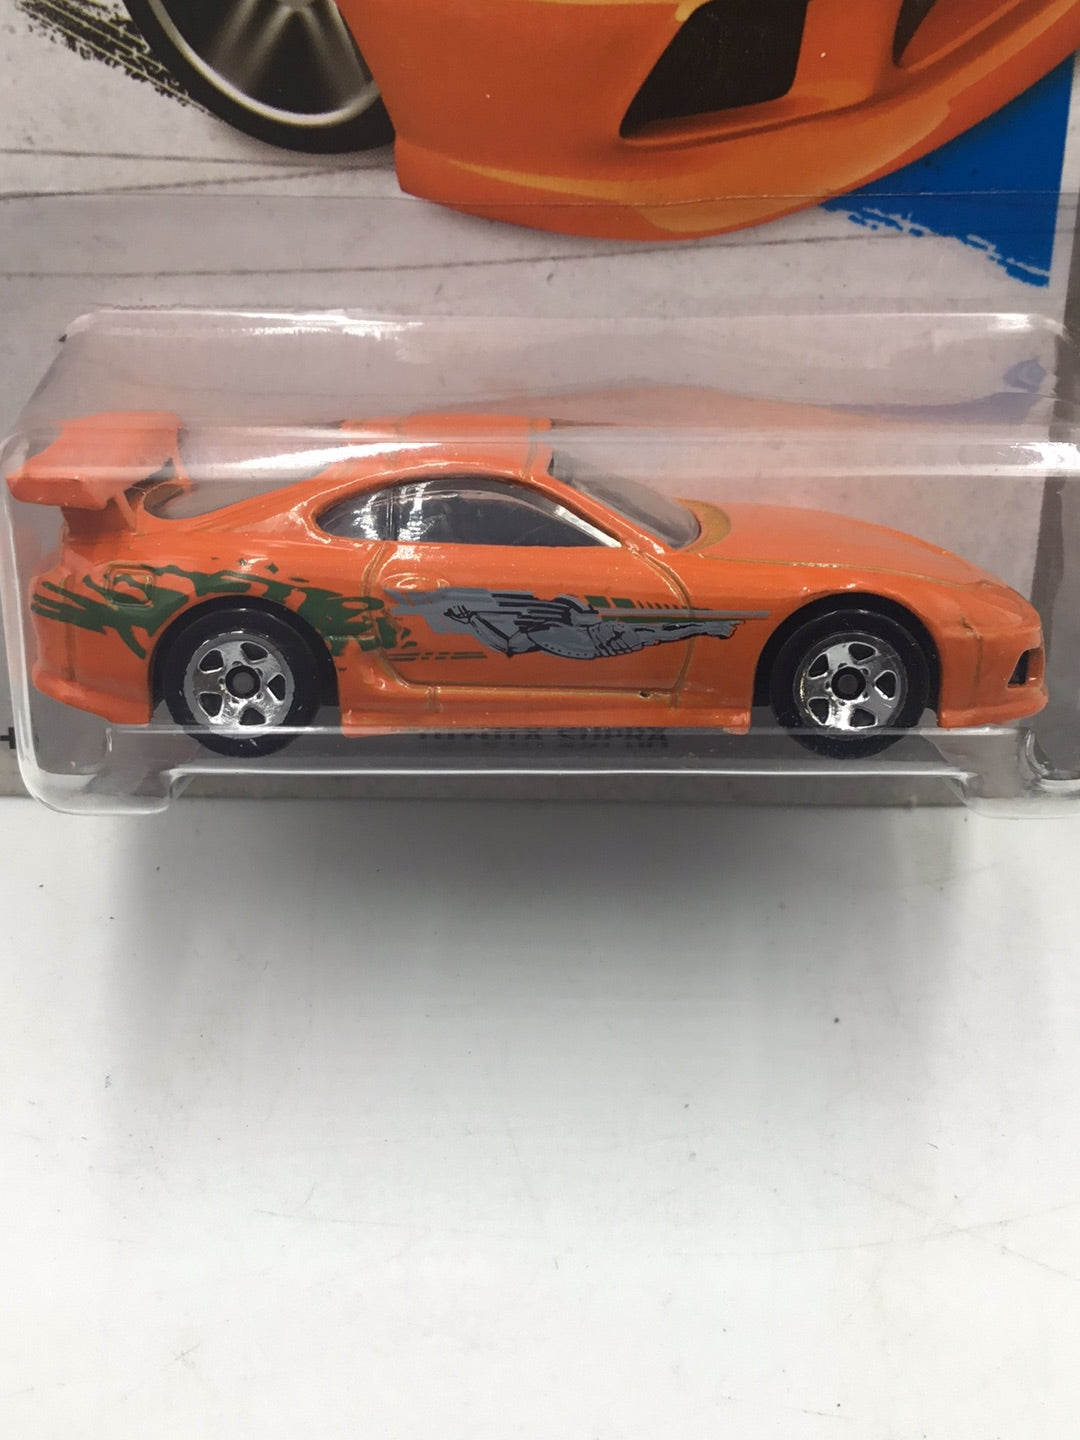 2013 Hot wheels fast and furious #5 Toyota Supra with protector